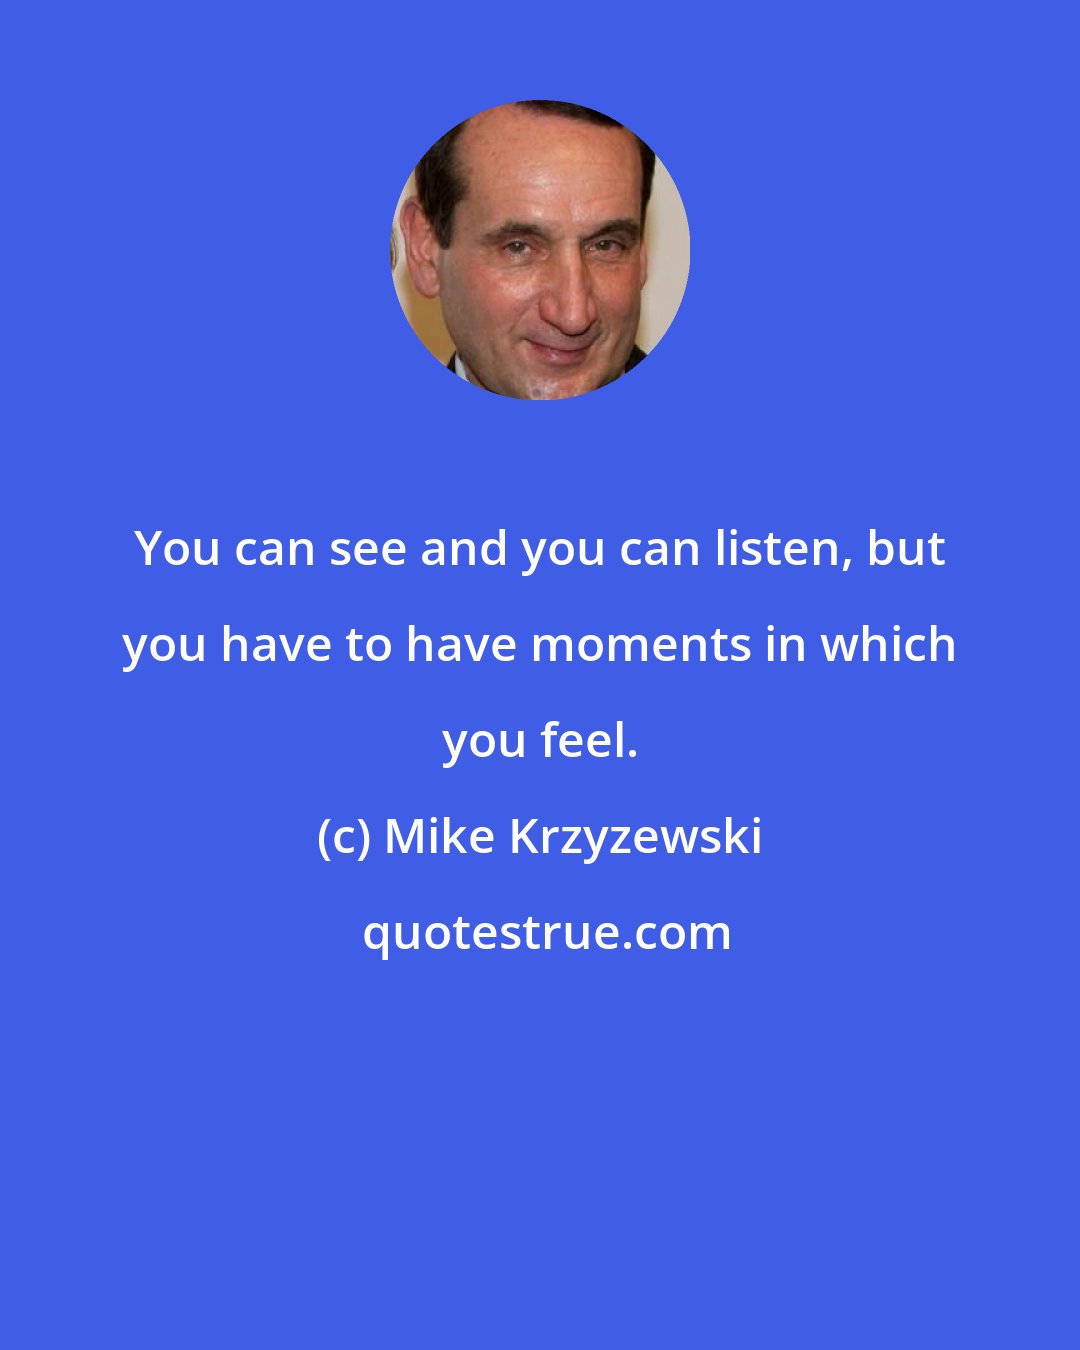 Mike Krzyzewski: You can see and you can listen, but you have to have moments in which you feel.